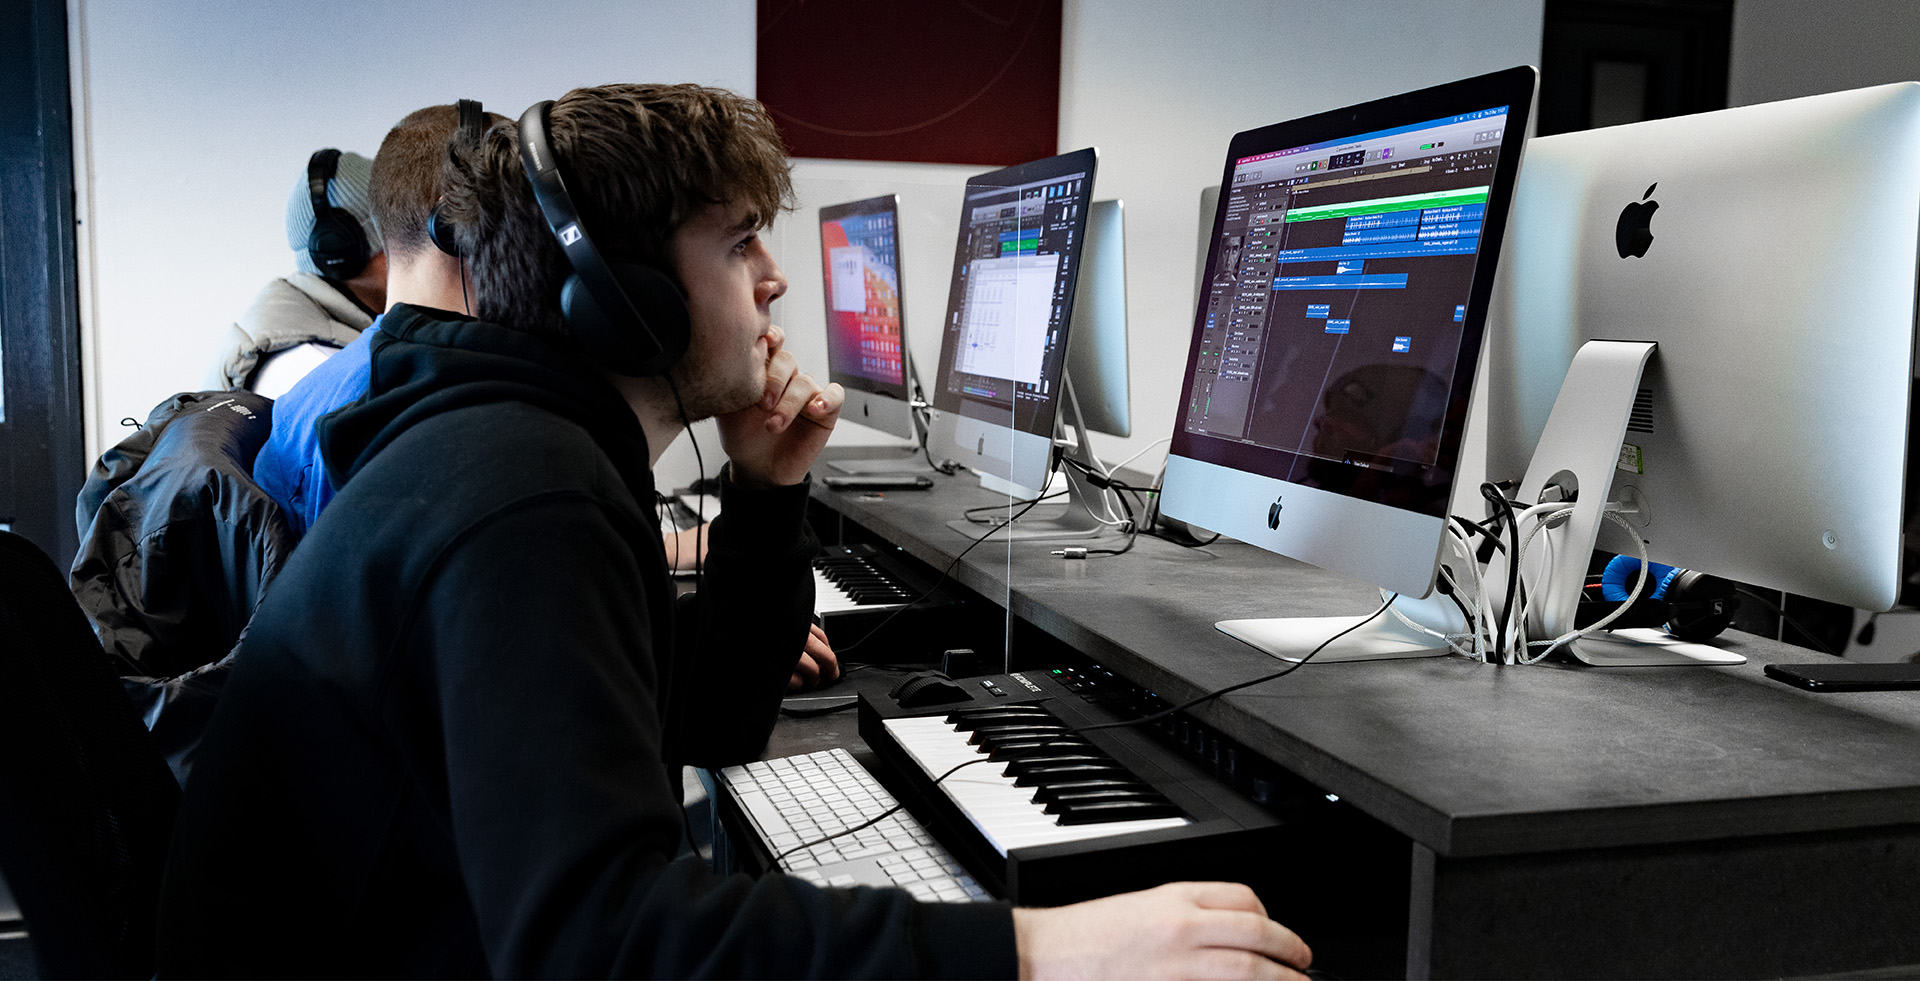 college student with headphones using an apple mac to produce music. There is a keyboard on his desk